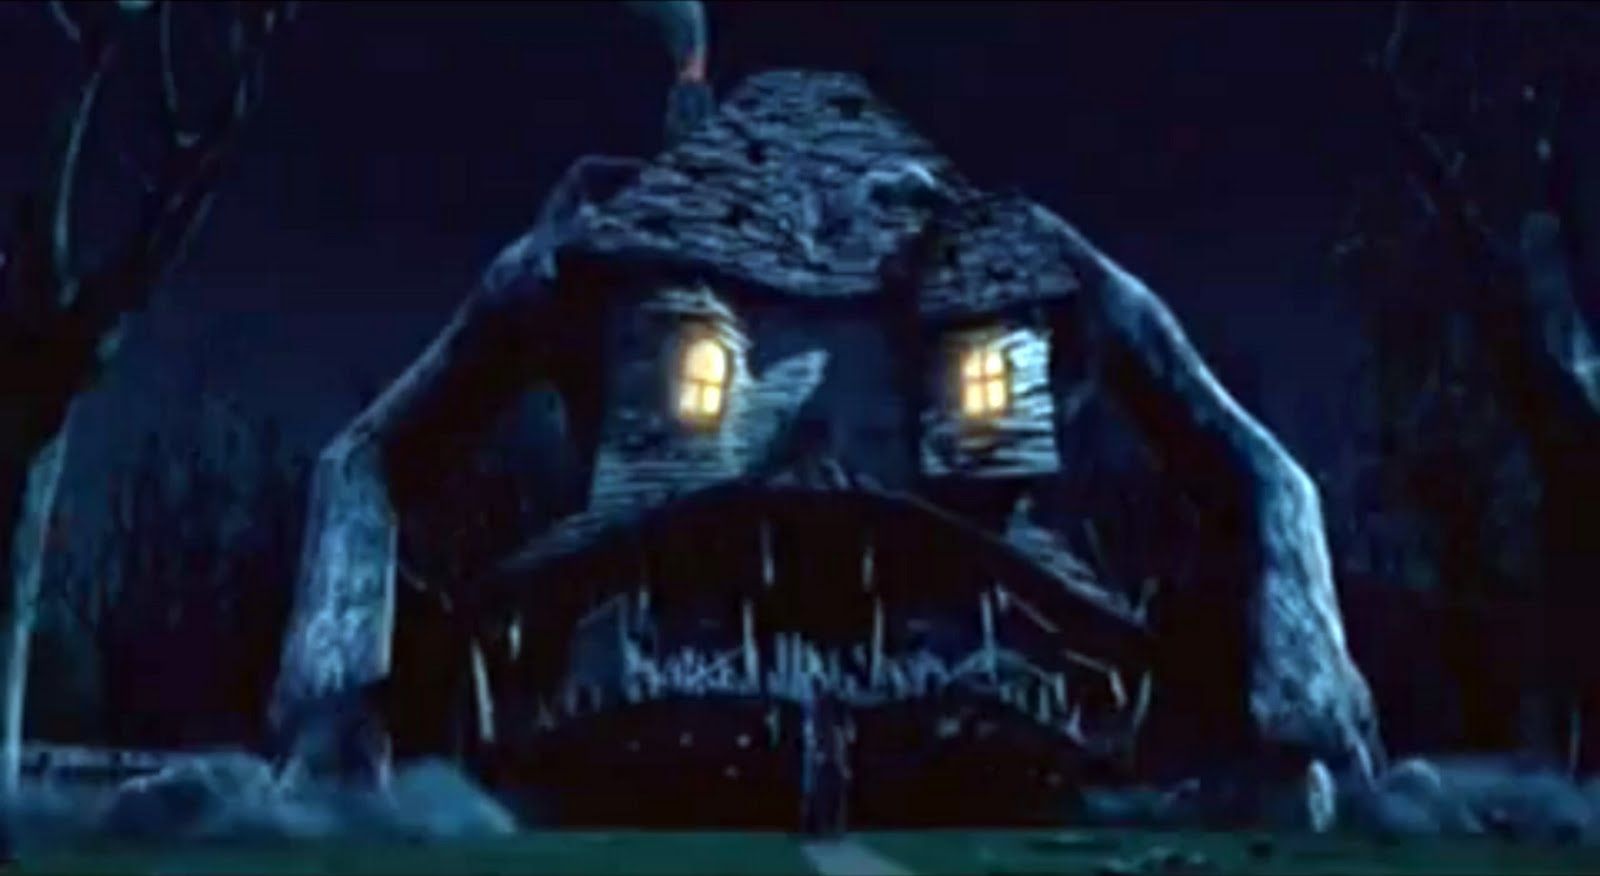 1600x876px Monster House 73.62 KB